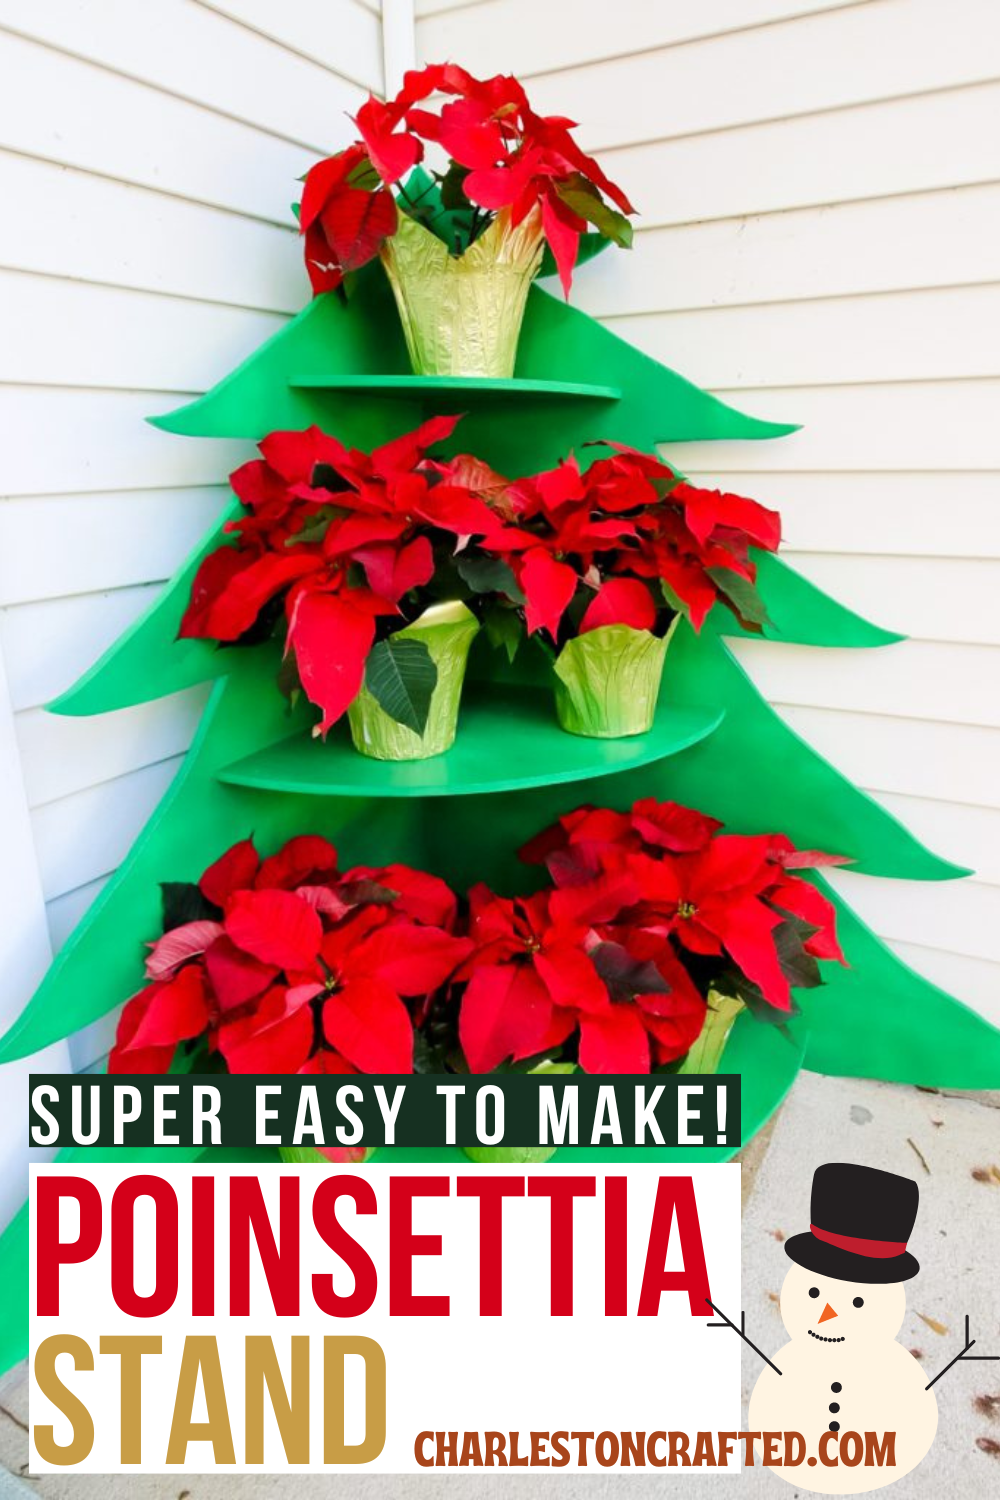 DIY poinsettia stand - Charleston Crafted